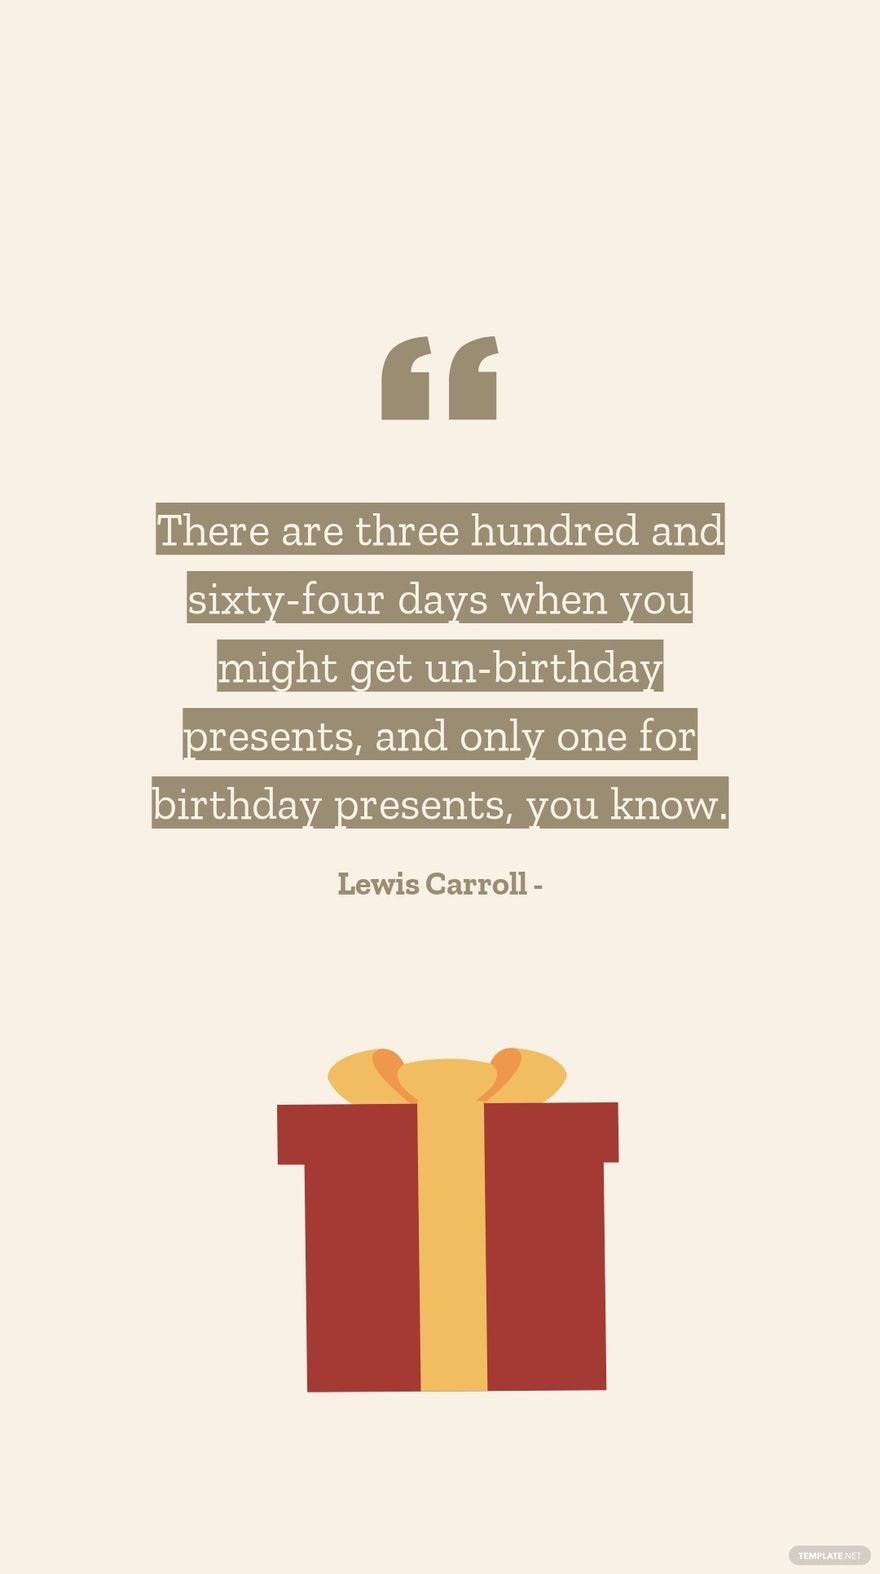 Free Lewis Carroll - There are three hundred and sixty-four days when you might get un-birthday presents, and only one for birthday presents, you know.